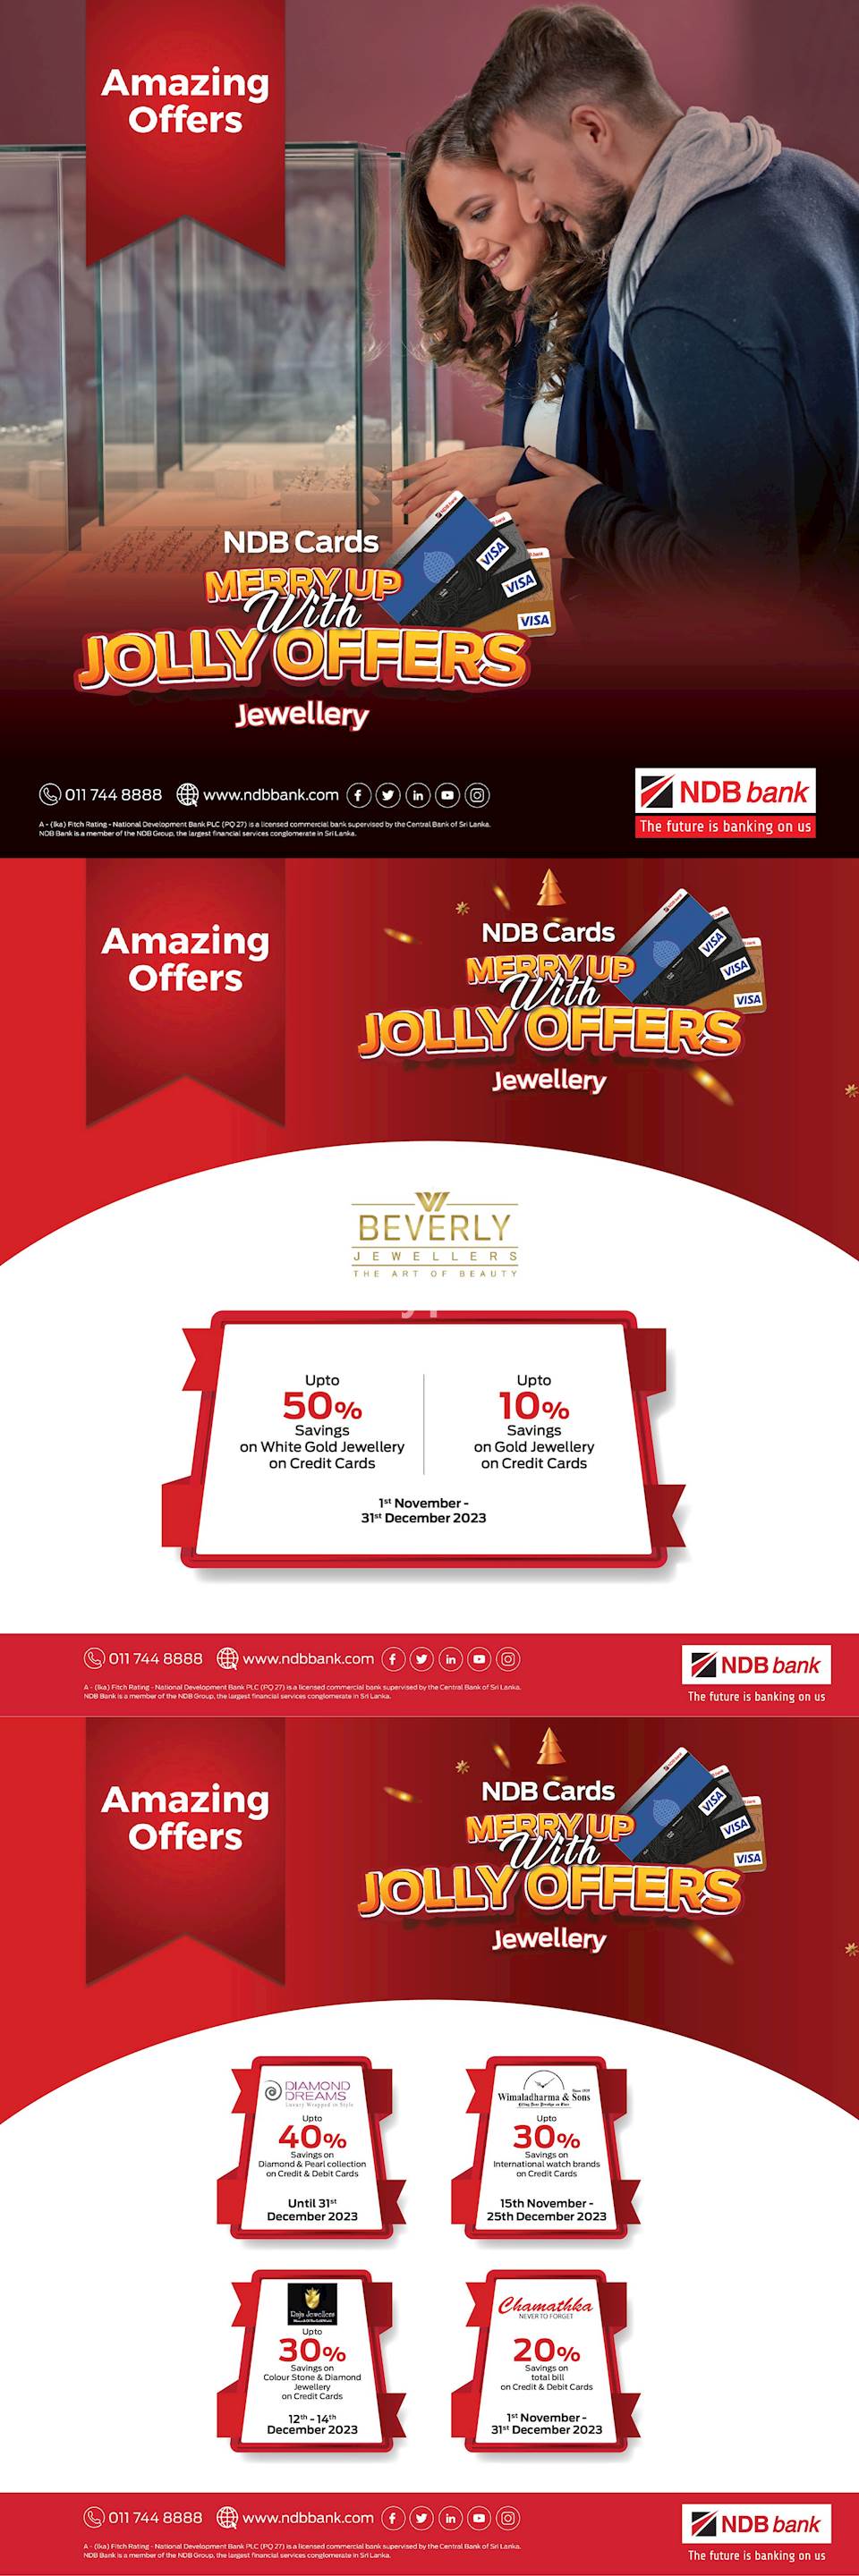 Jewellery Offers with NDB Bank Cards offers